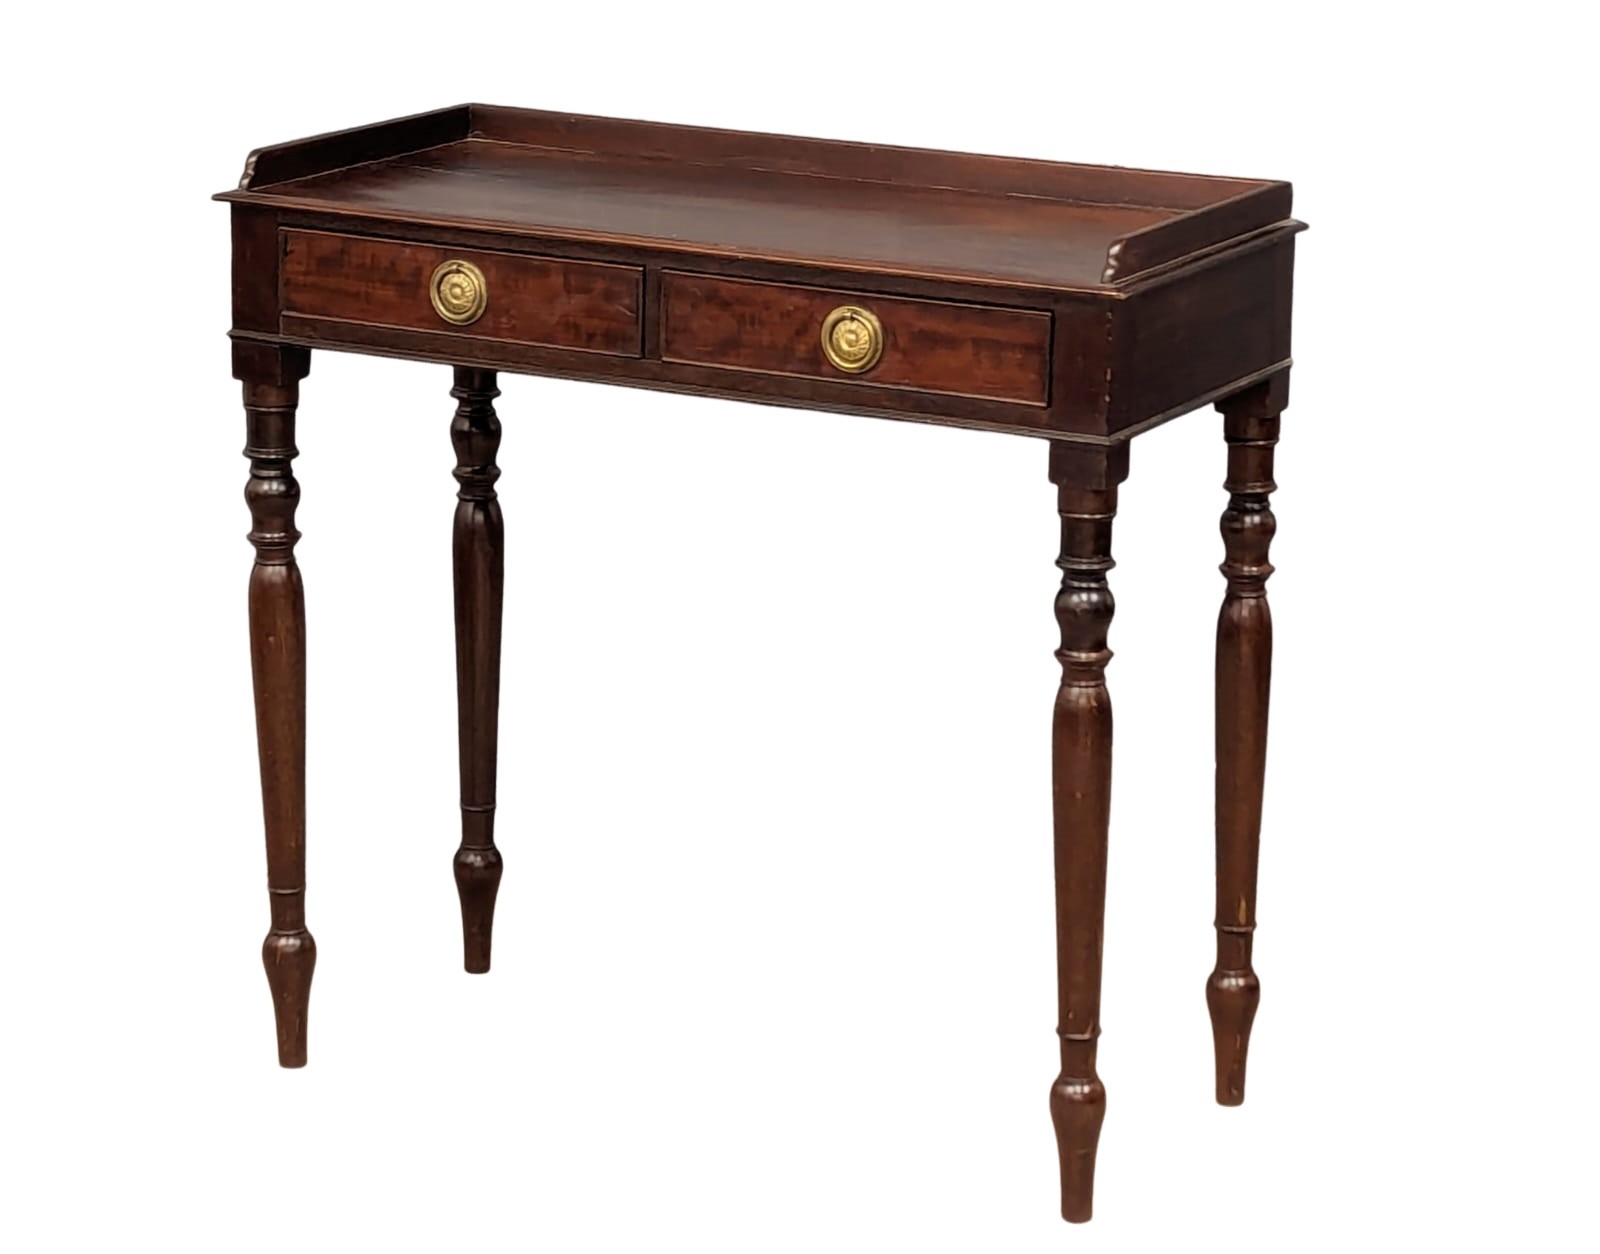 A Victorian mahogany gallery back hall table with 2 drawers with turned tapering legs. 79.5x38x78cm